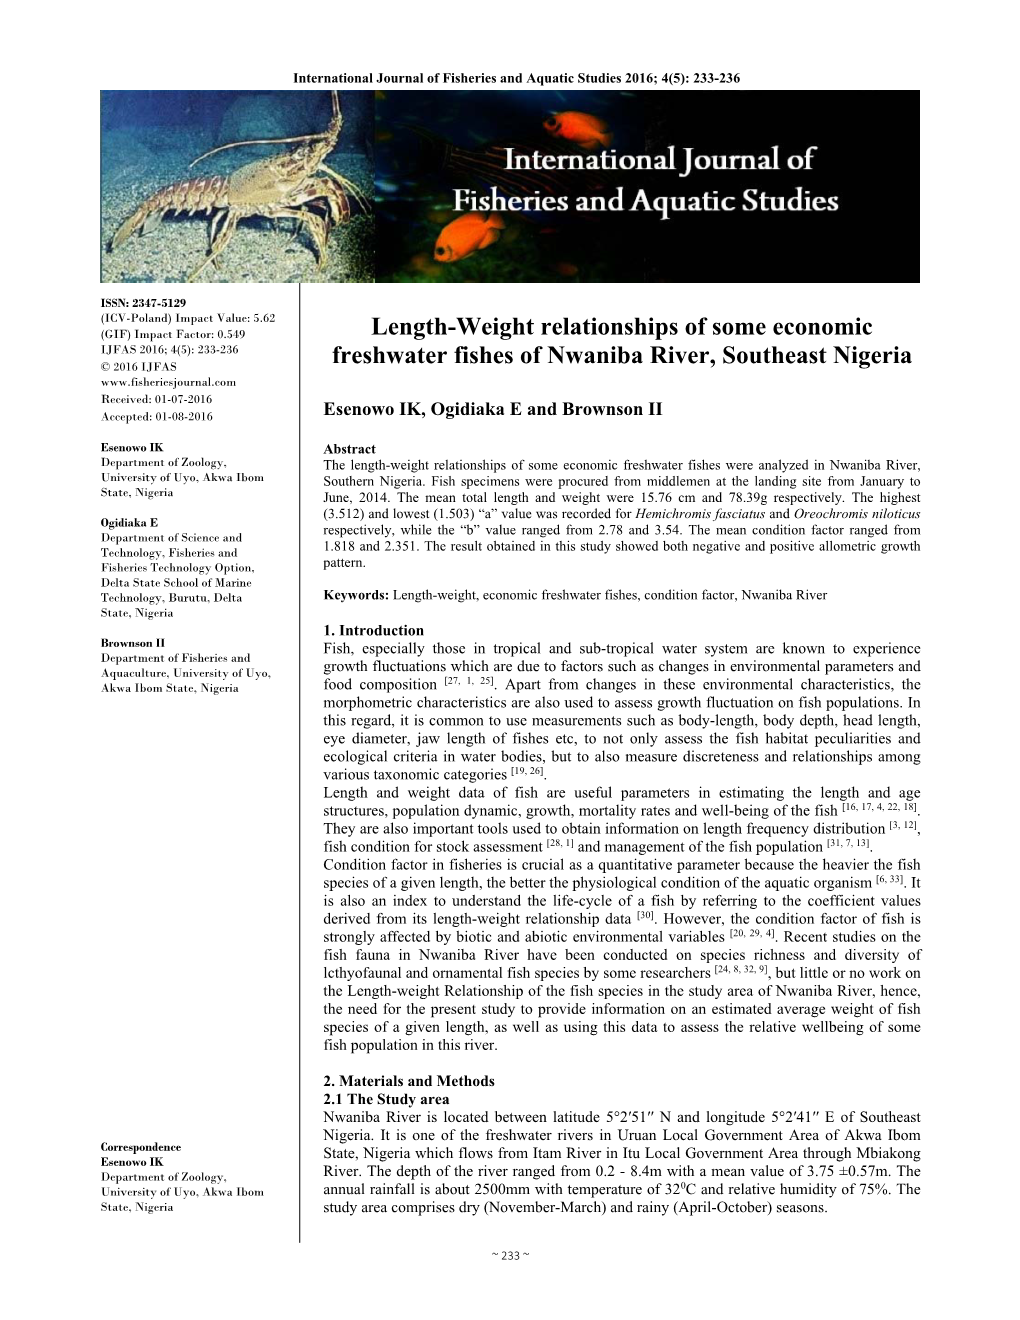 Length-Weight Relationships of Some Economic Freshwater Fishes of Nwaniba River, Southeast Nigeria